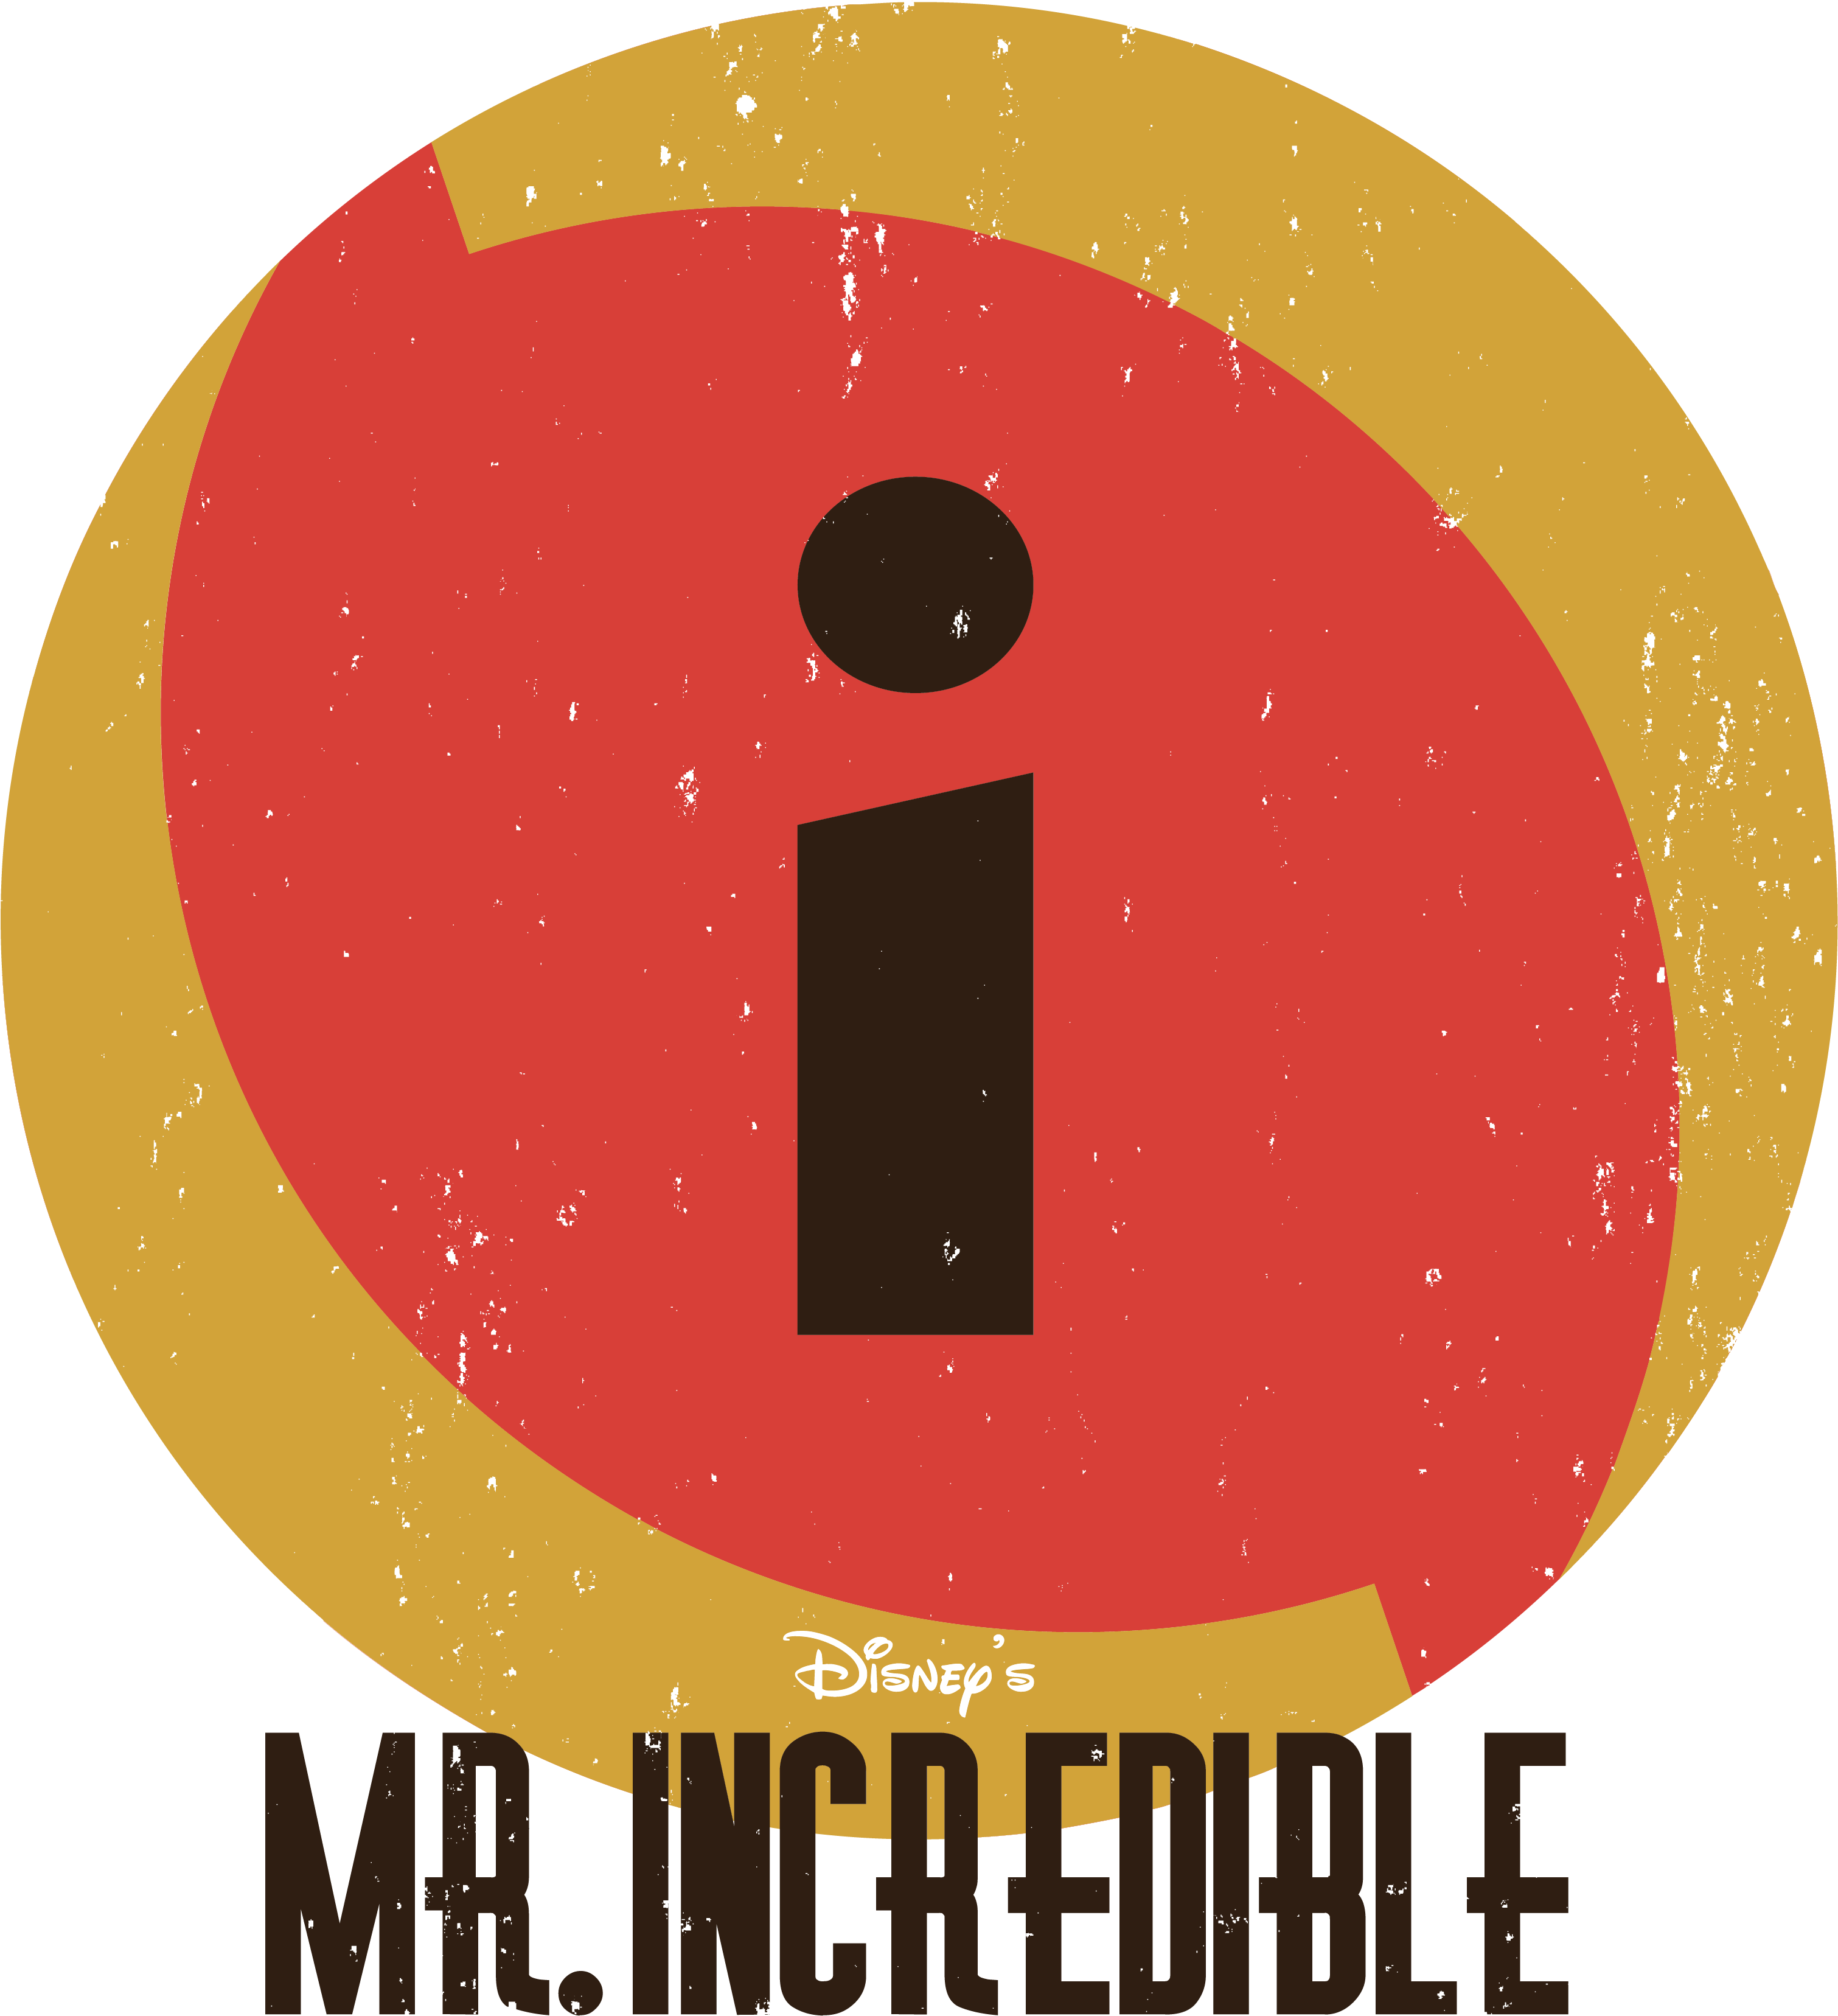 A Logo With A Yellow Circle And A Red Circle With A Black Letter